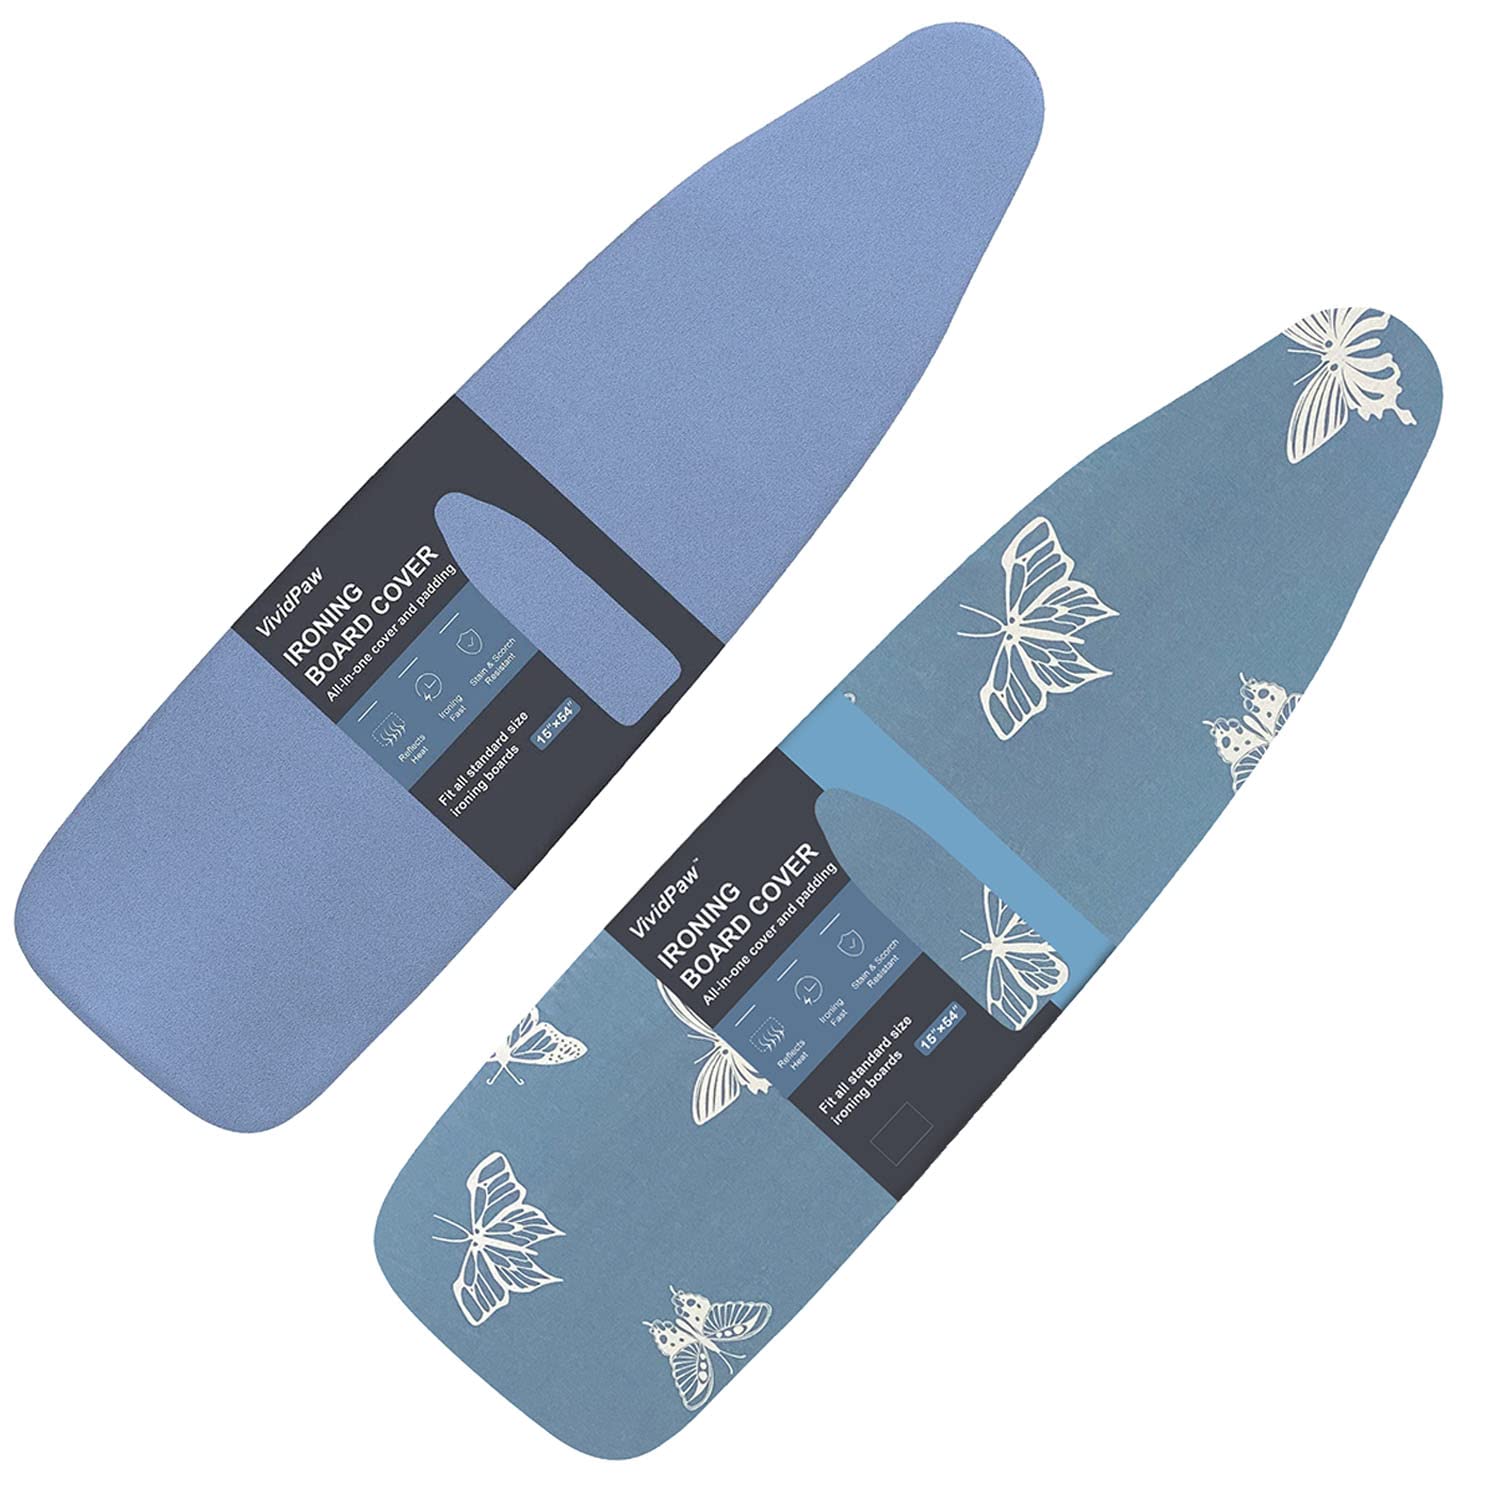 VividPaw Ironing Board Cover and Pad Standard Size 15×54, Value Pack (Blue and Butterfly)